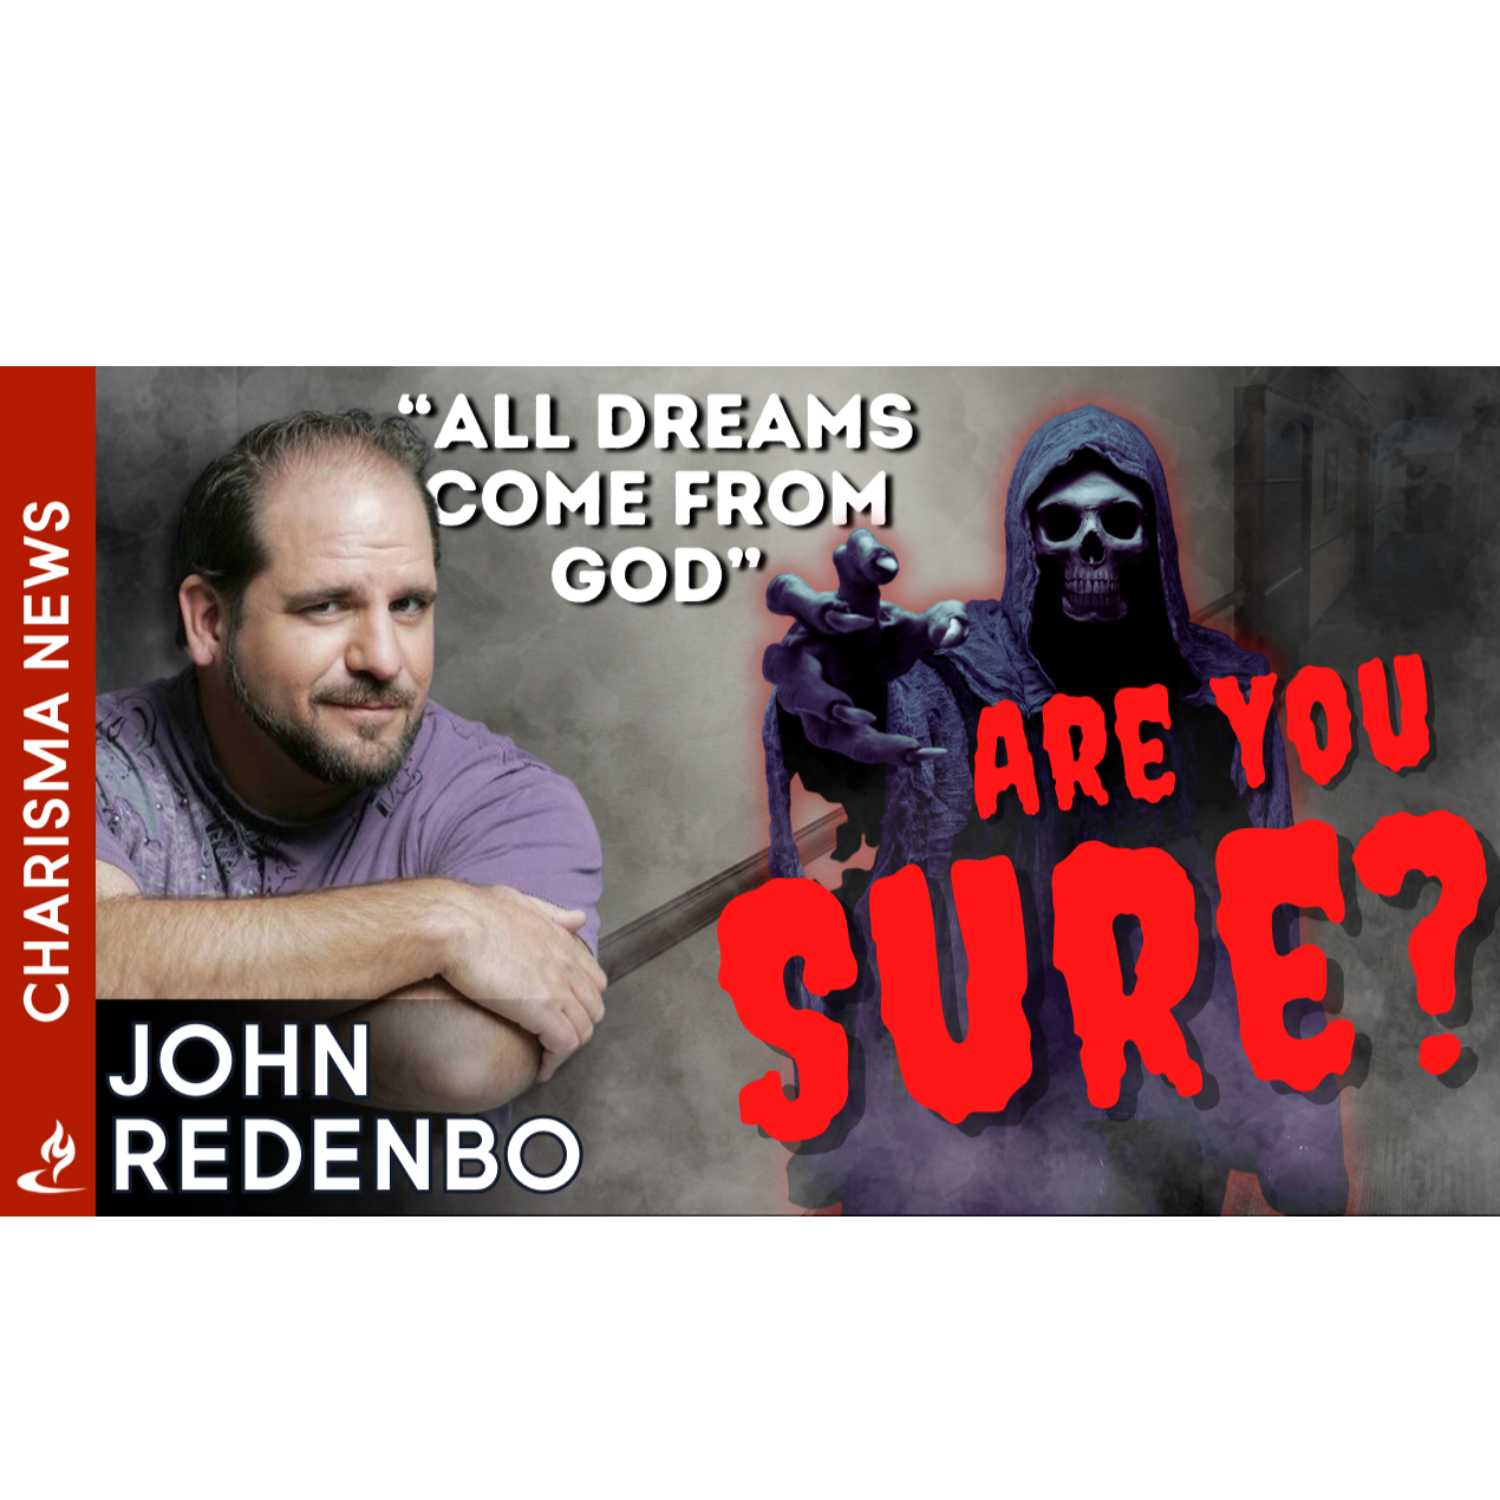 ”Decoded Nightmares and Spiritual Intelligence Revealed” with John Redenbo  @DreamLifeDecoded